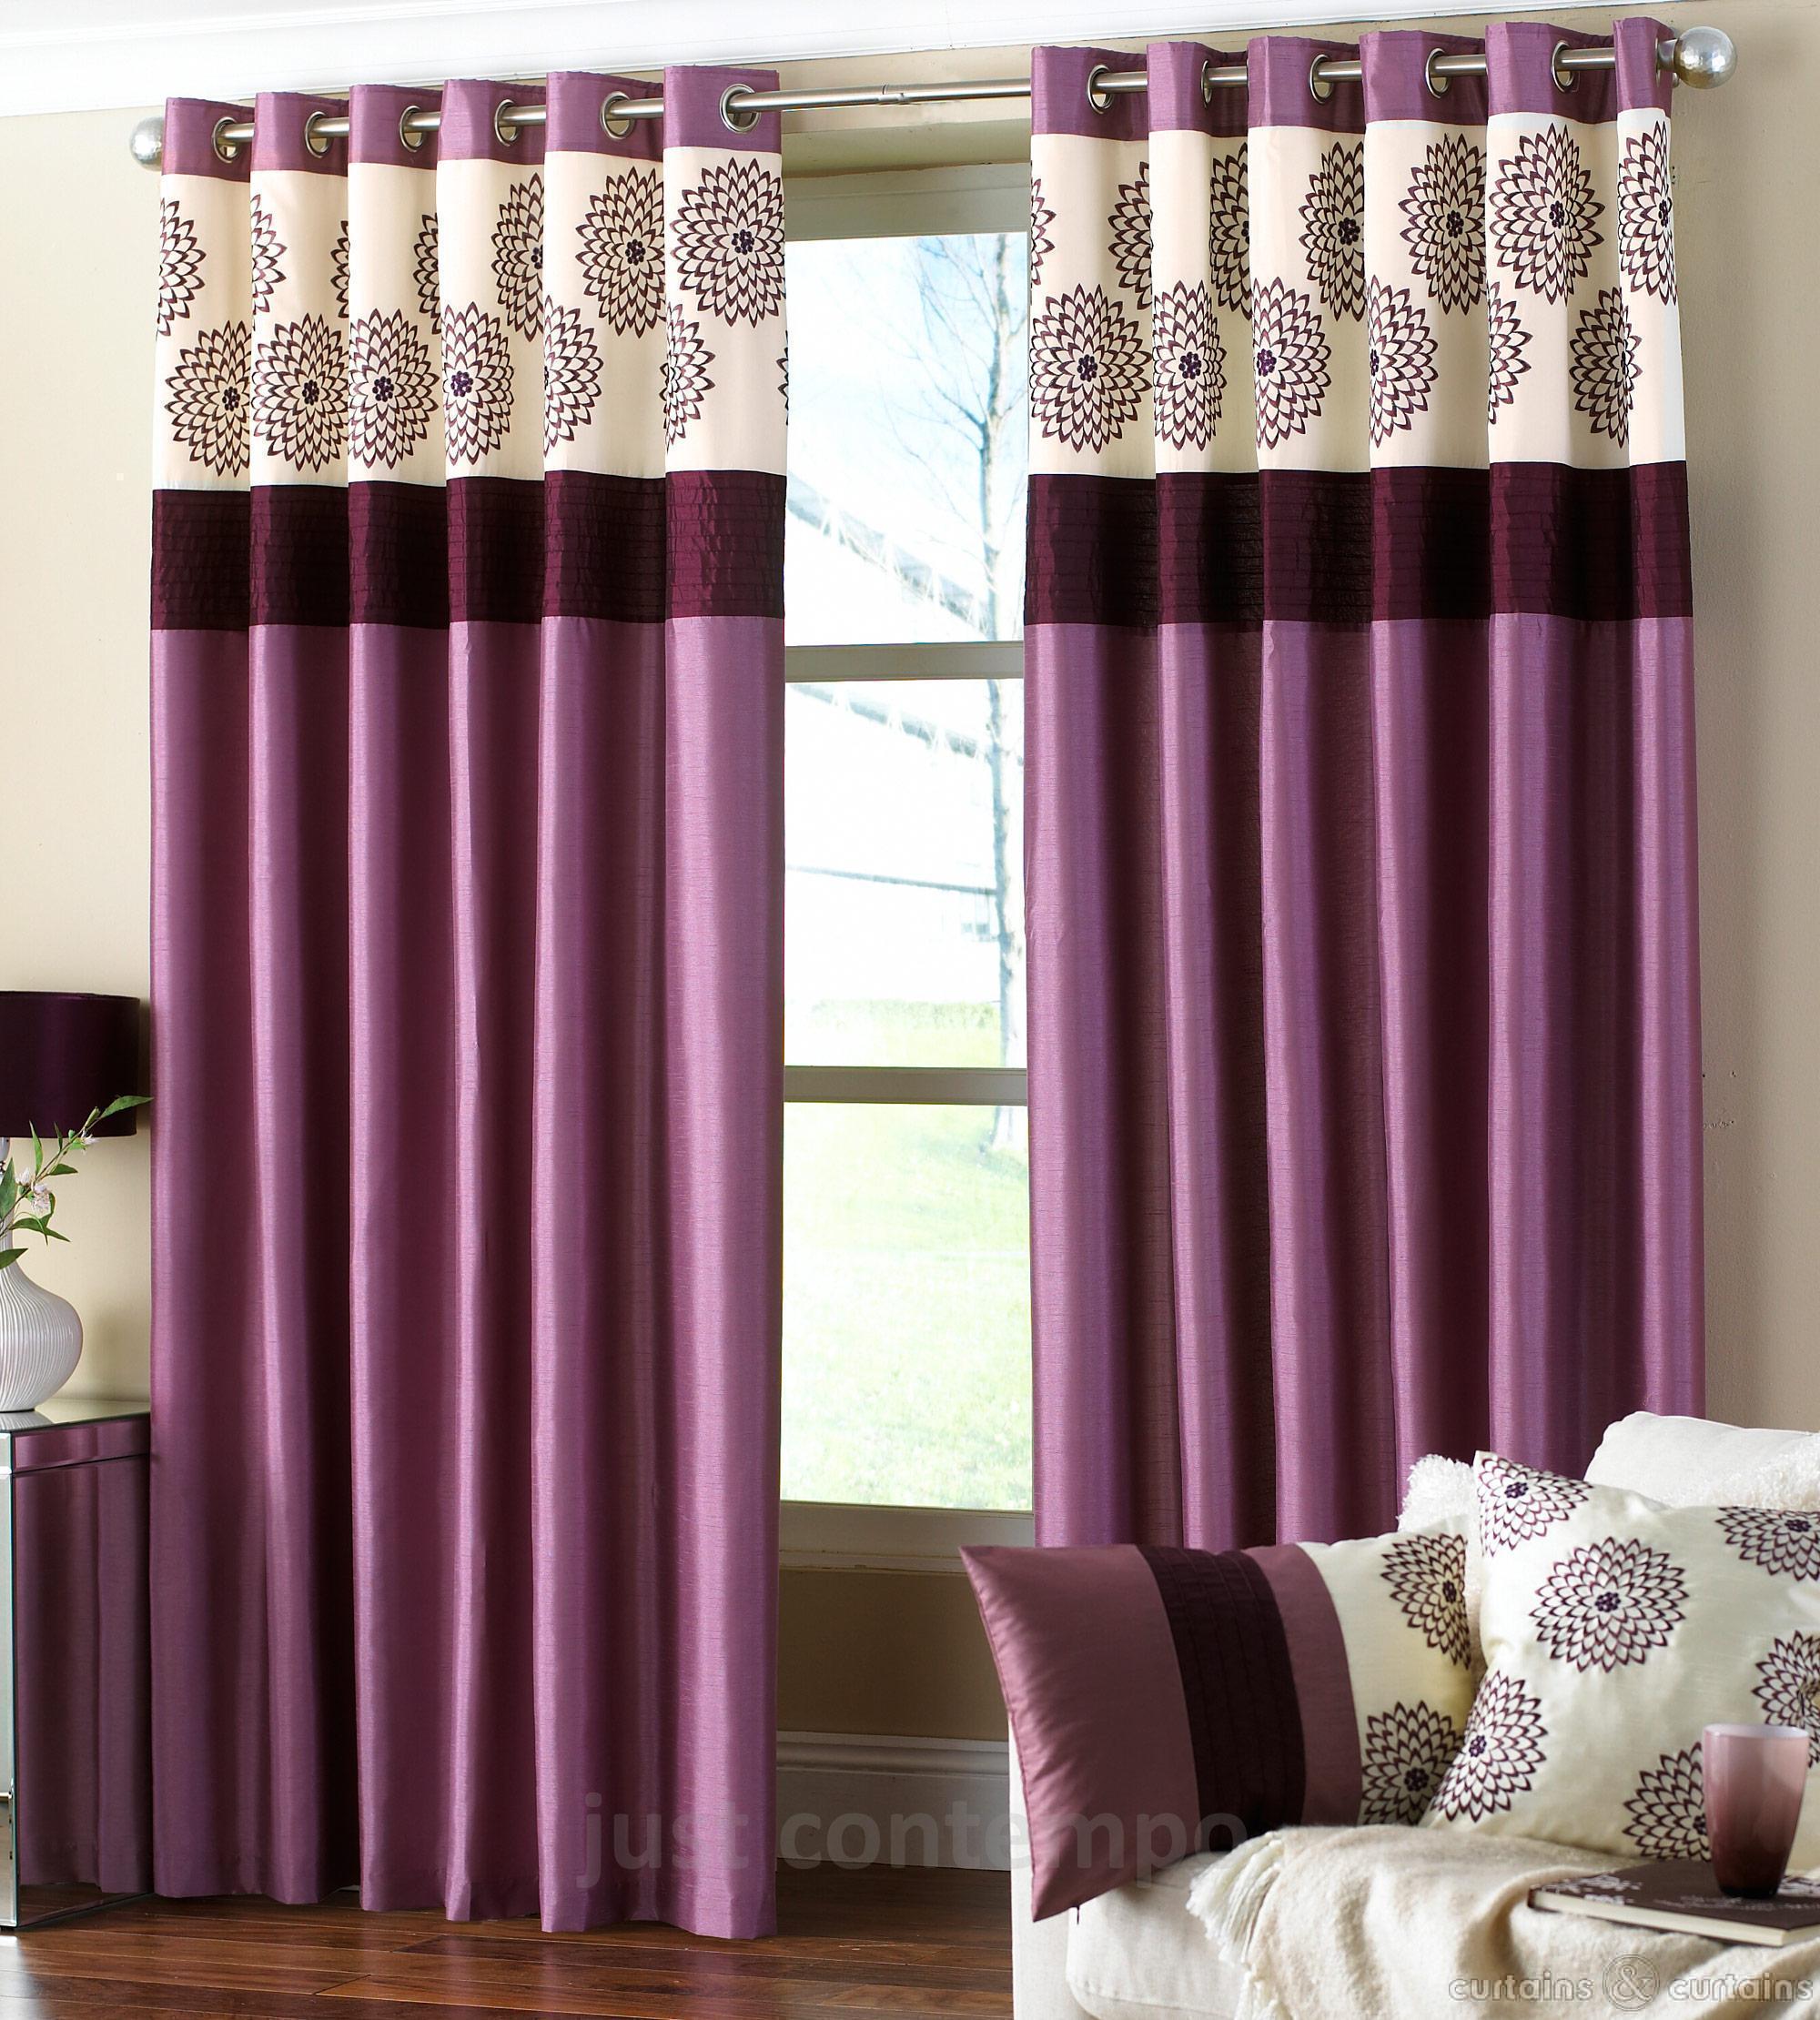 Choosing Curtain Designs? Think of These 4 Aspects! - InspirationSeek.com